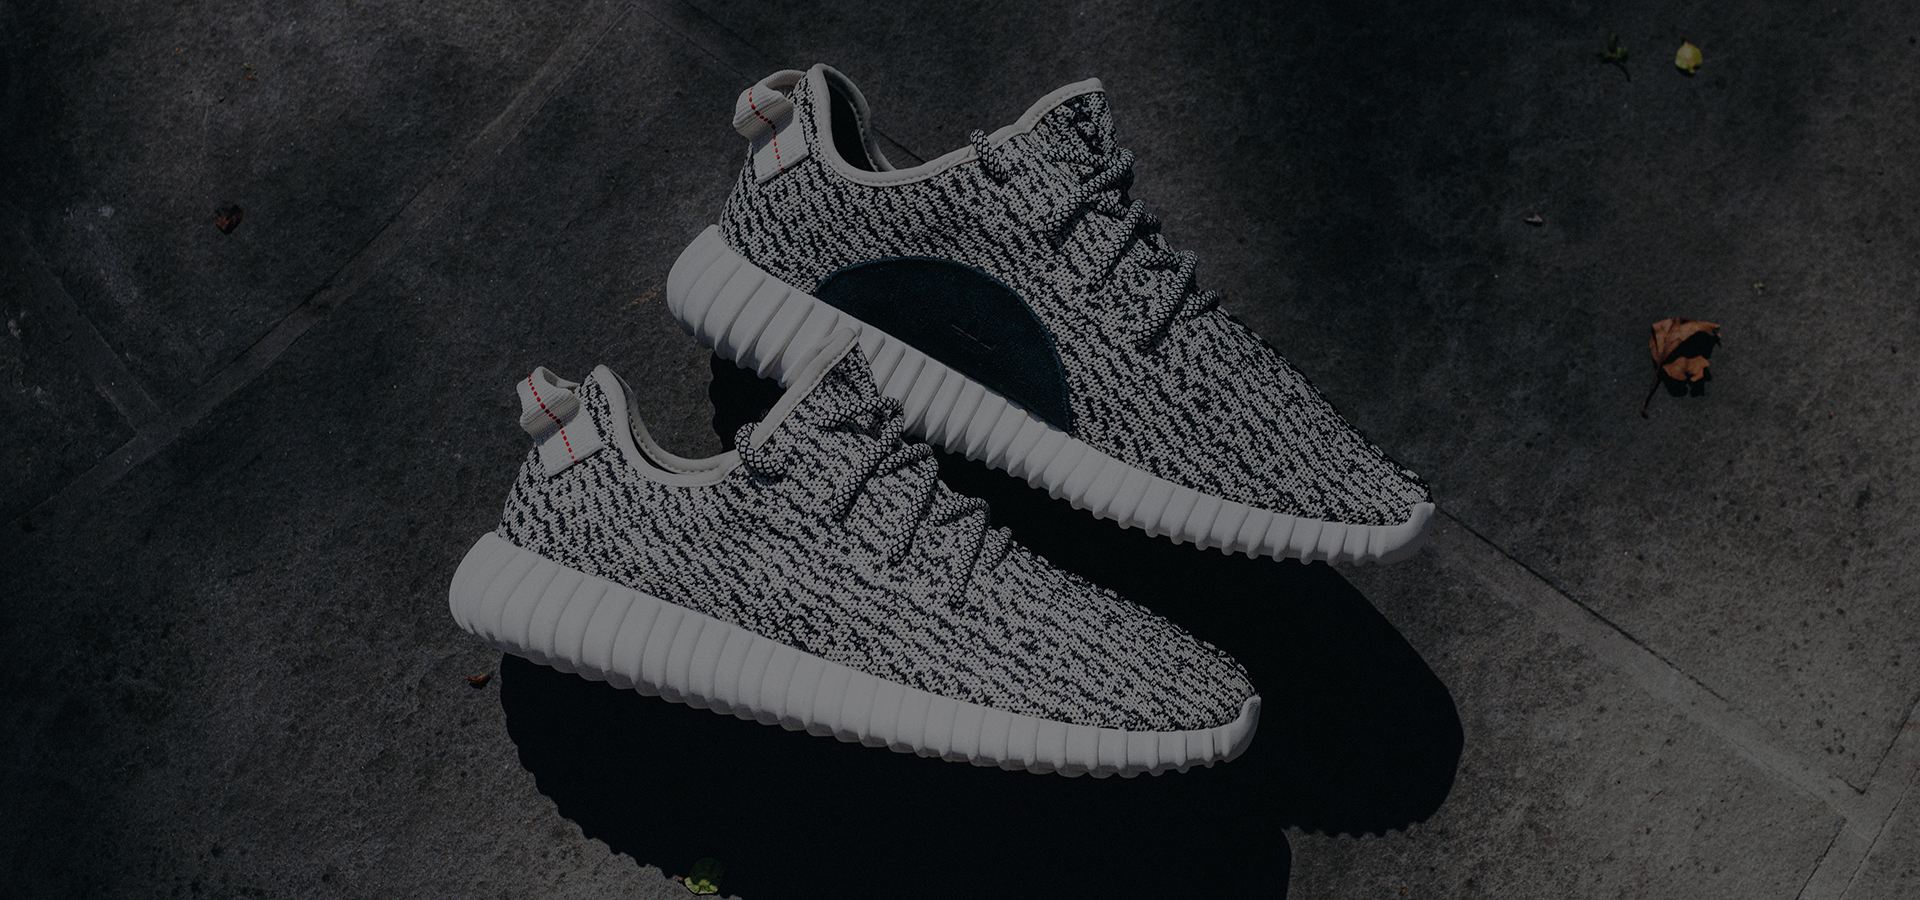 FitforhealthShops | Yeezy 350 Guide 2022 | adidas TR21 Shoes Kids